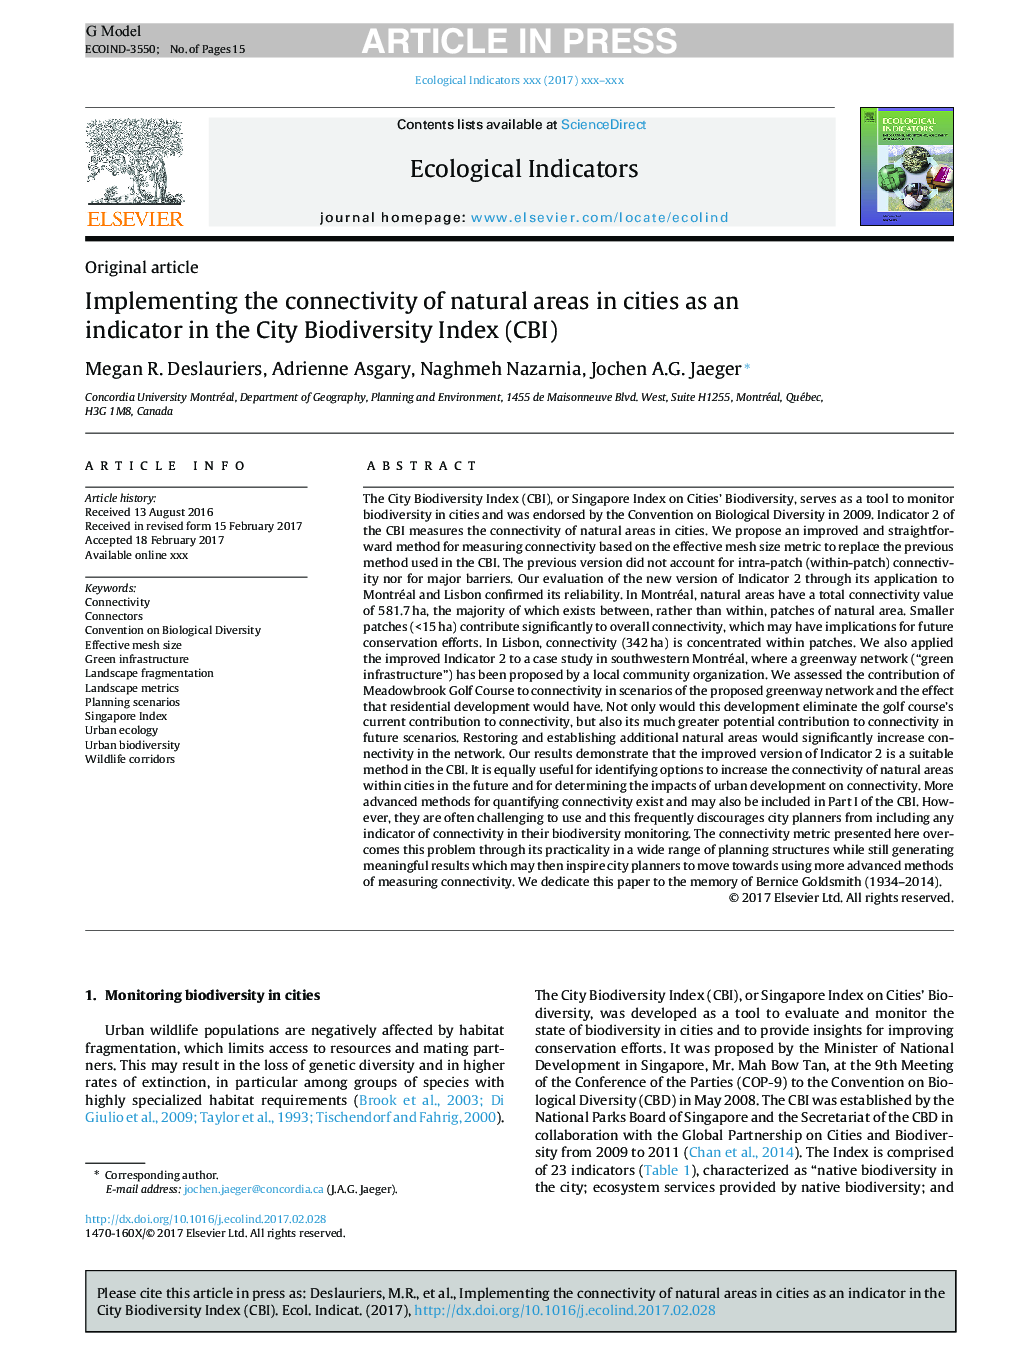 Implementing the connectivity of natural areas in cities as an indicator in the City Biodiversity Index (CBI)